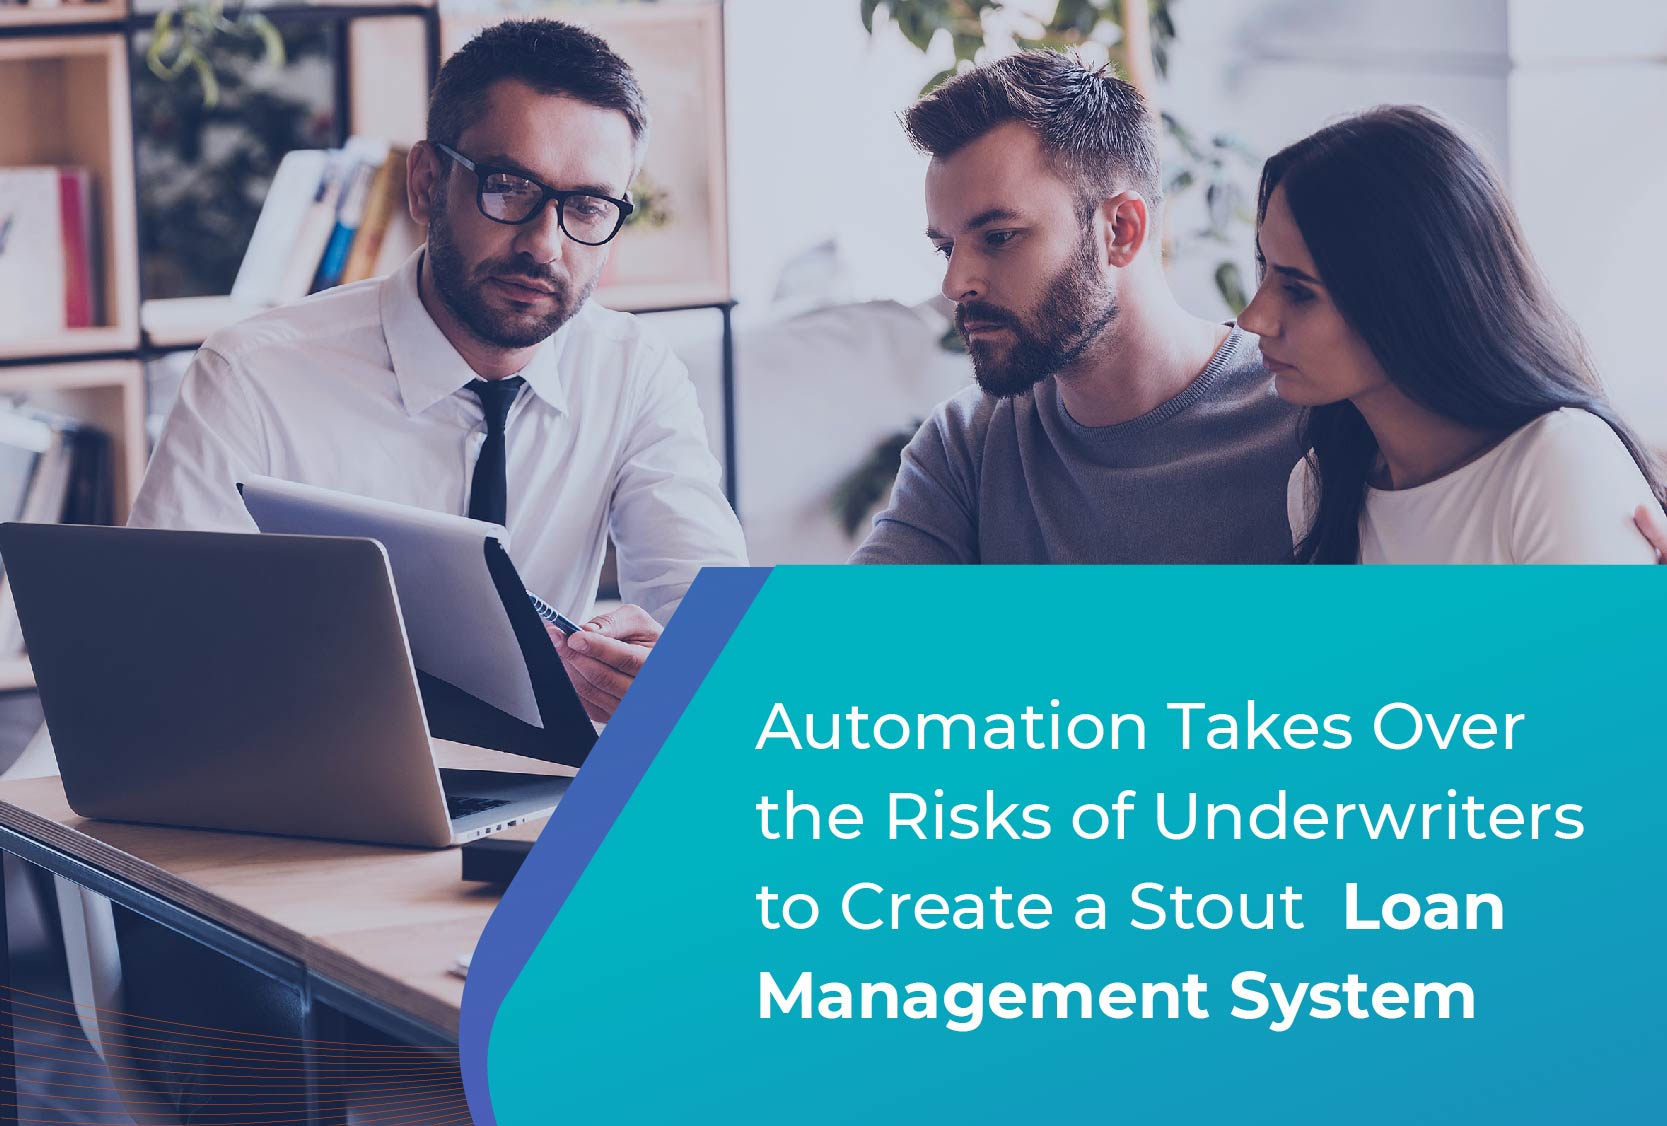 Automation Takes Over the Risks of Underwriters to Create a Stout Loan Management System